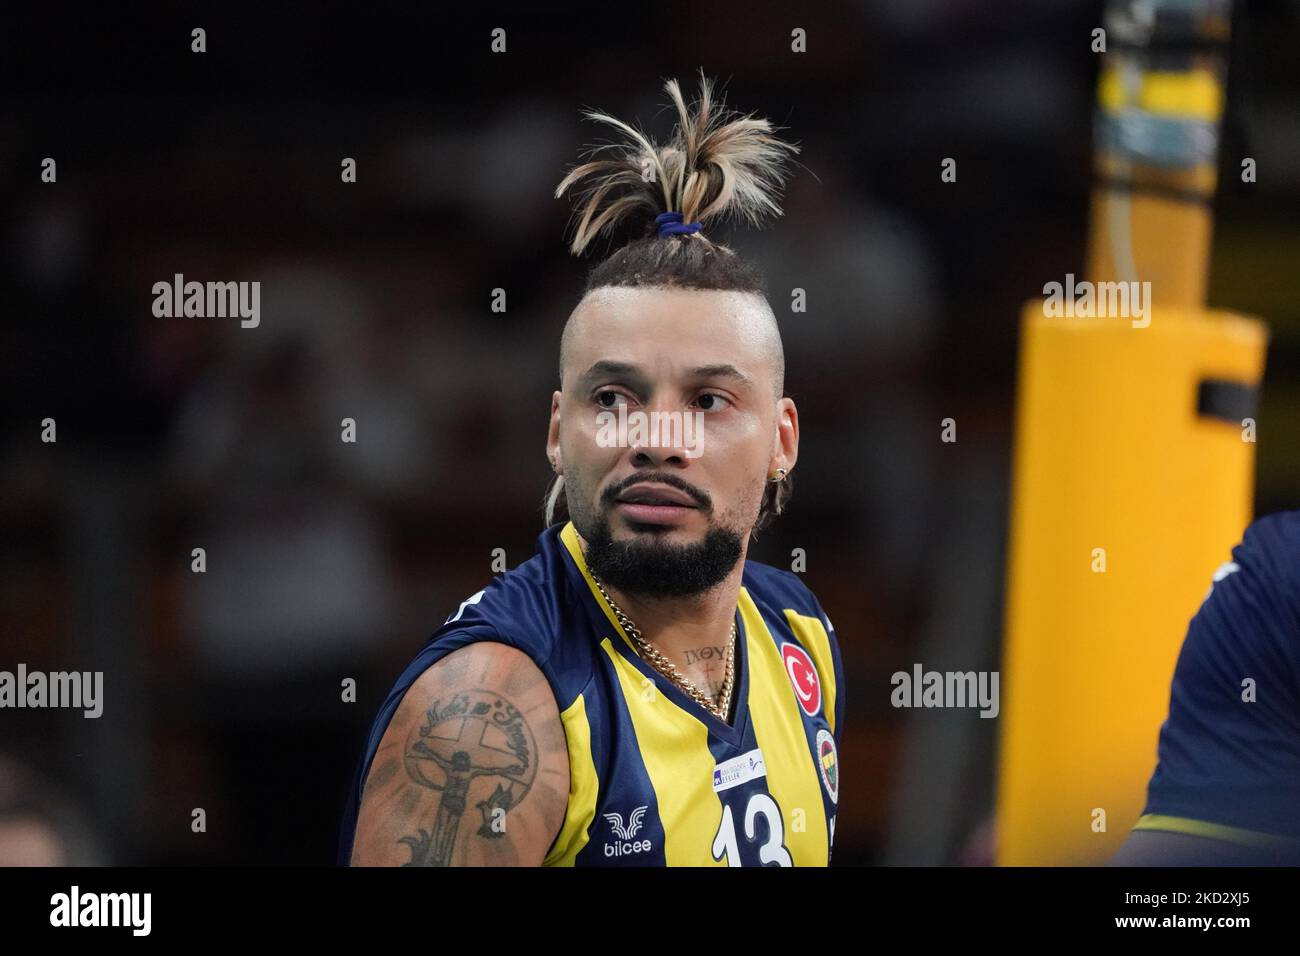 hidalgo oliva salvador (n.13 fenerbahce istanbul) during the CEV Champions League volleyball match Sir Sicoma Monini Perugia vs Fenerbahce HDI Istanbul on February 16, 2022 at the Pala Barton in Perugia, Italy (Photo by Loris Cerquiglini/LiveMedia/NurPhoto) Stock Photo